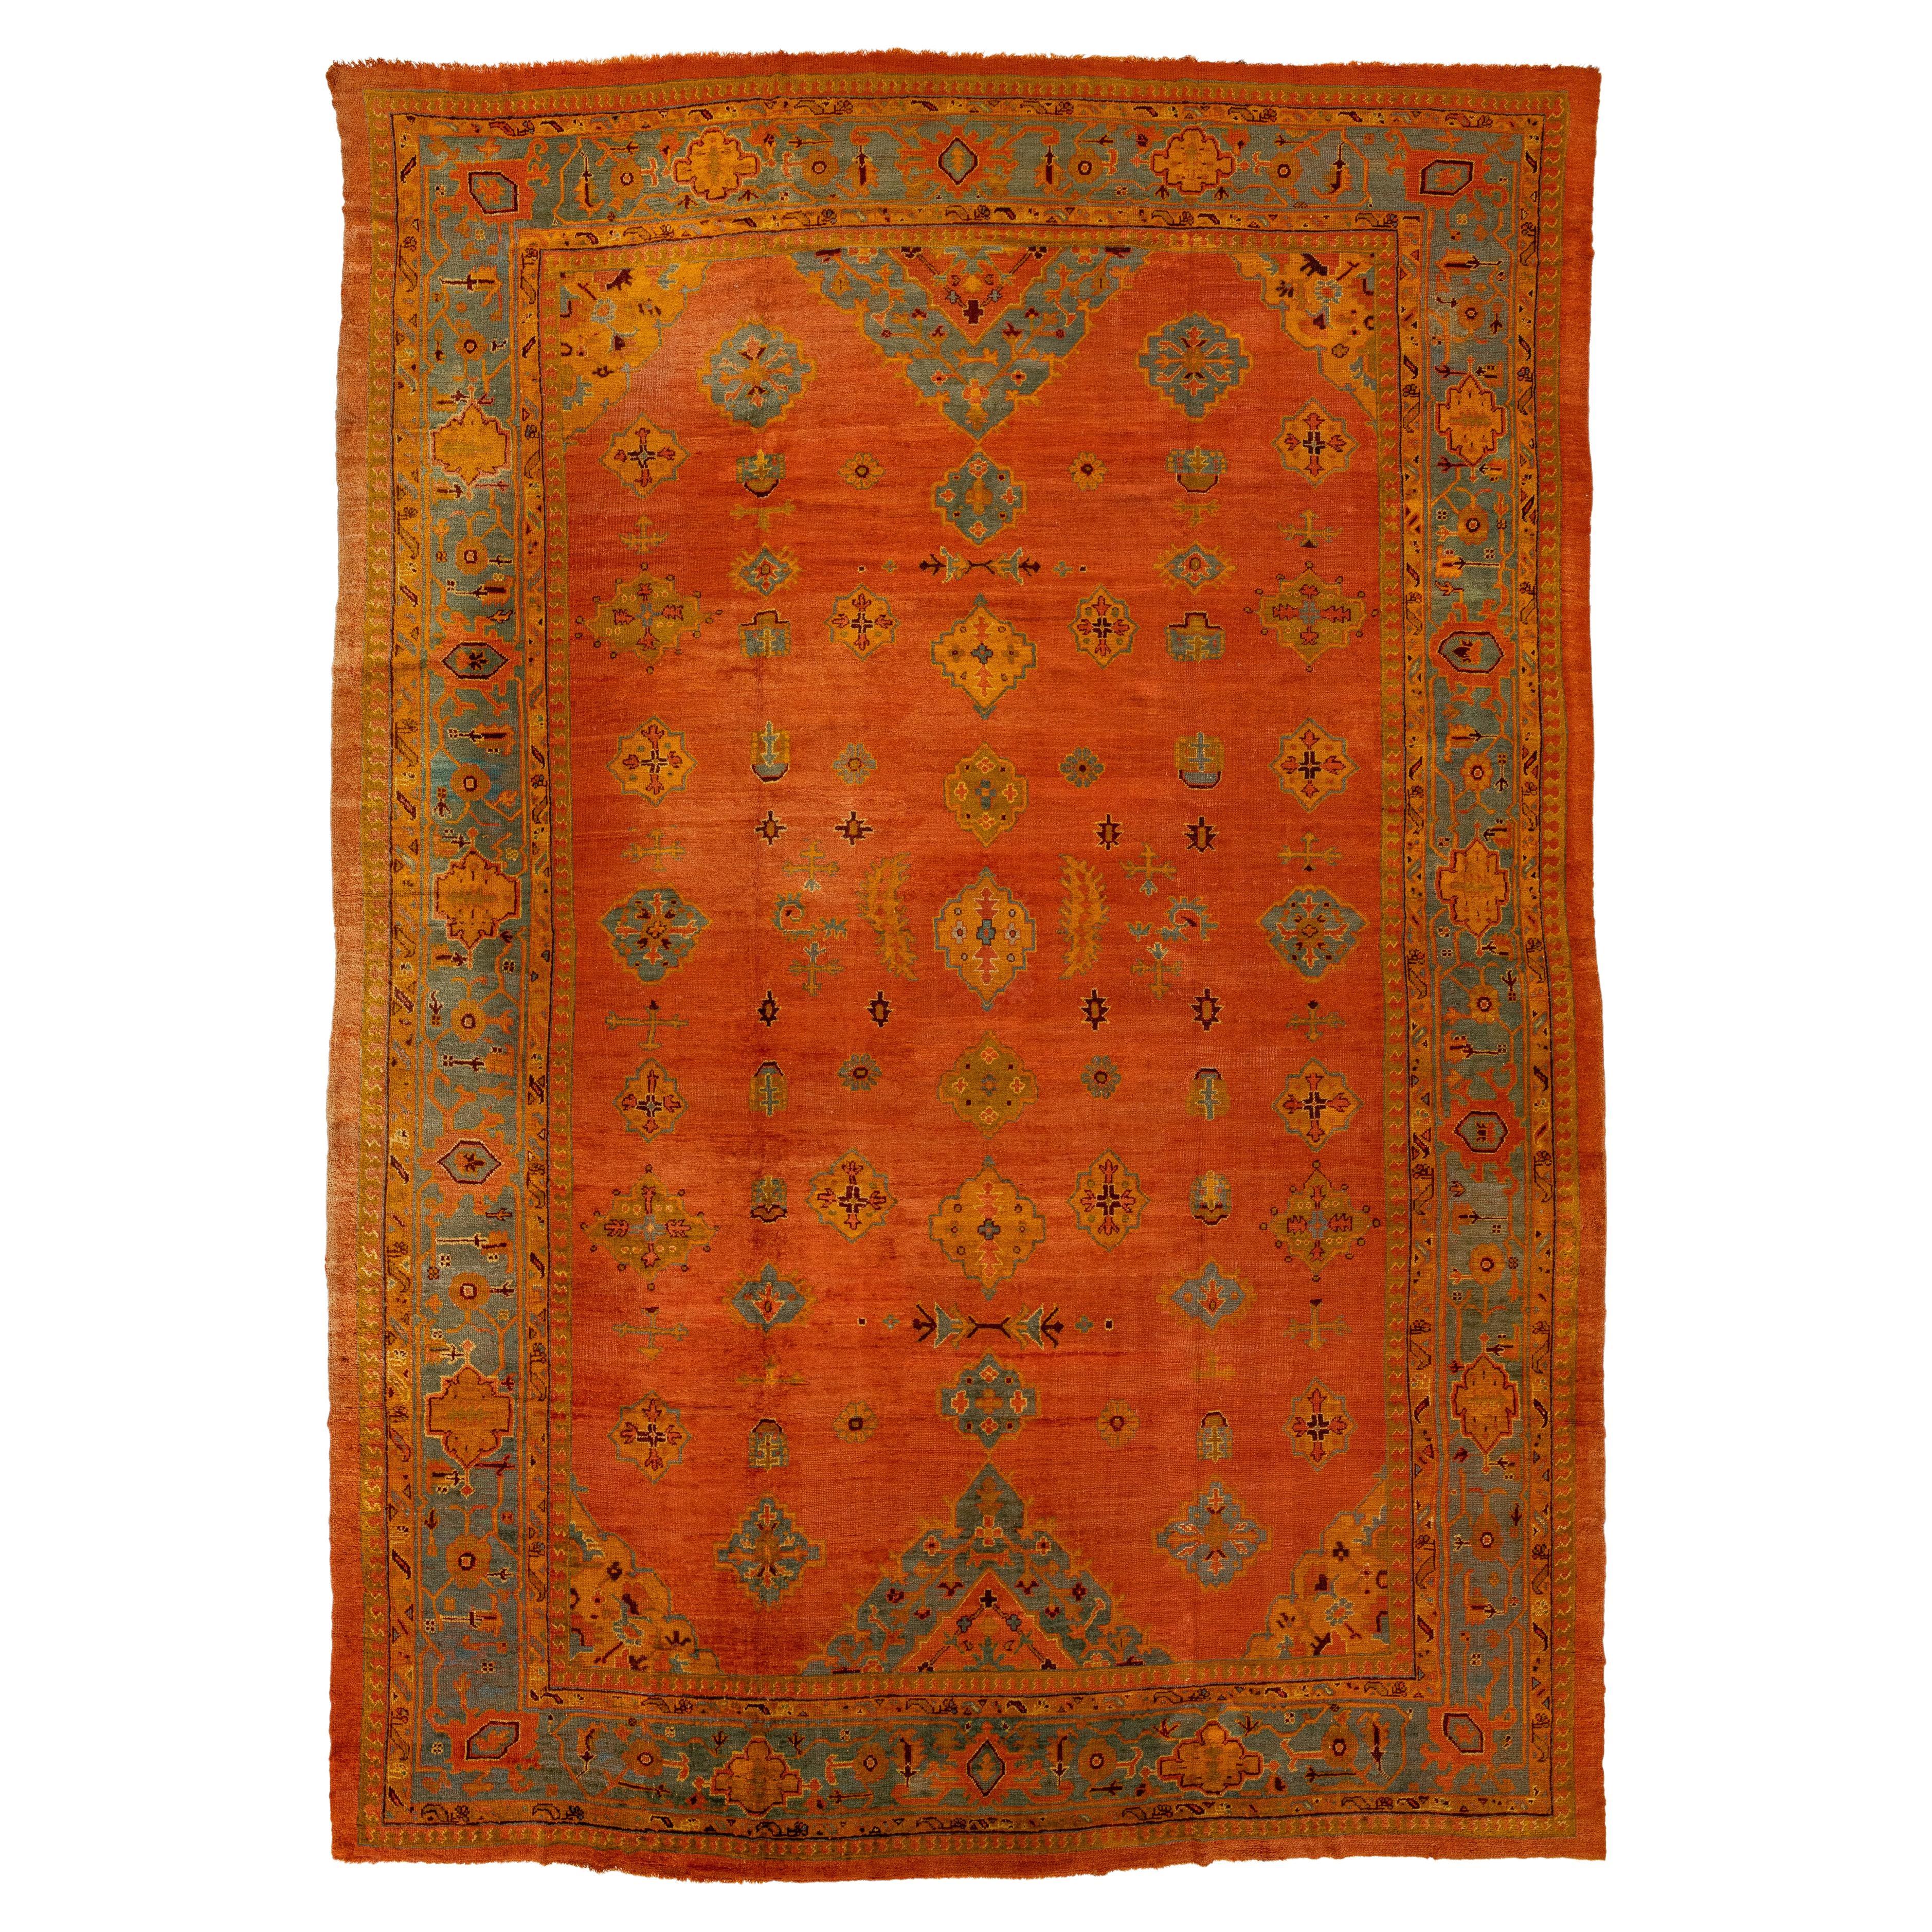 1880s Turkish Oushak Wool Rug Handmade In Red- Rust Featuring an Allover Motif 